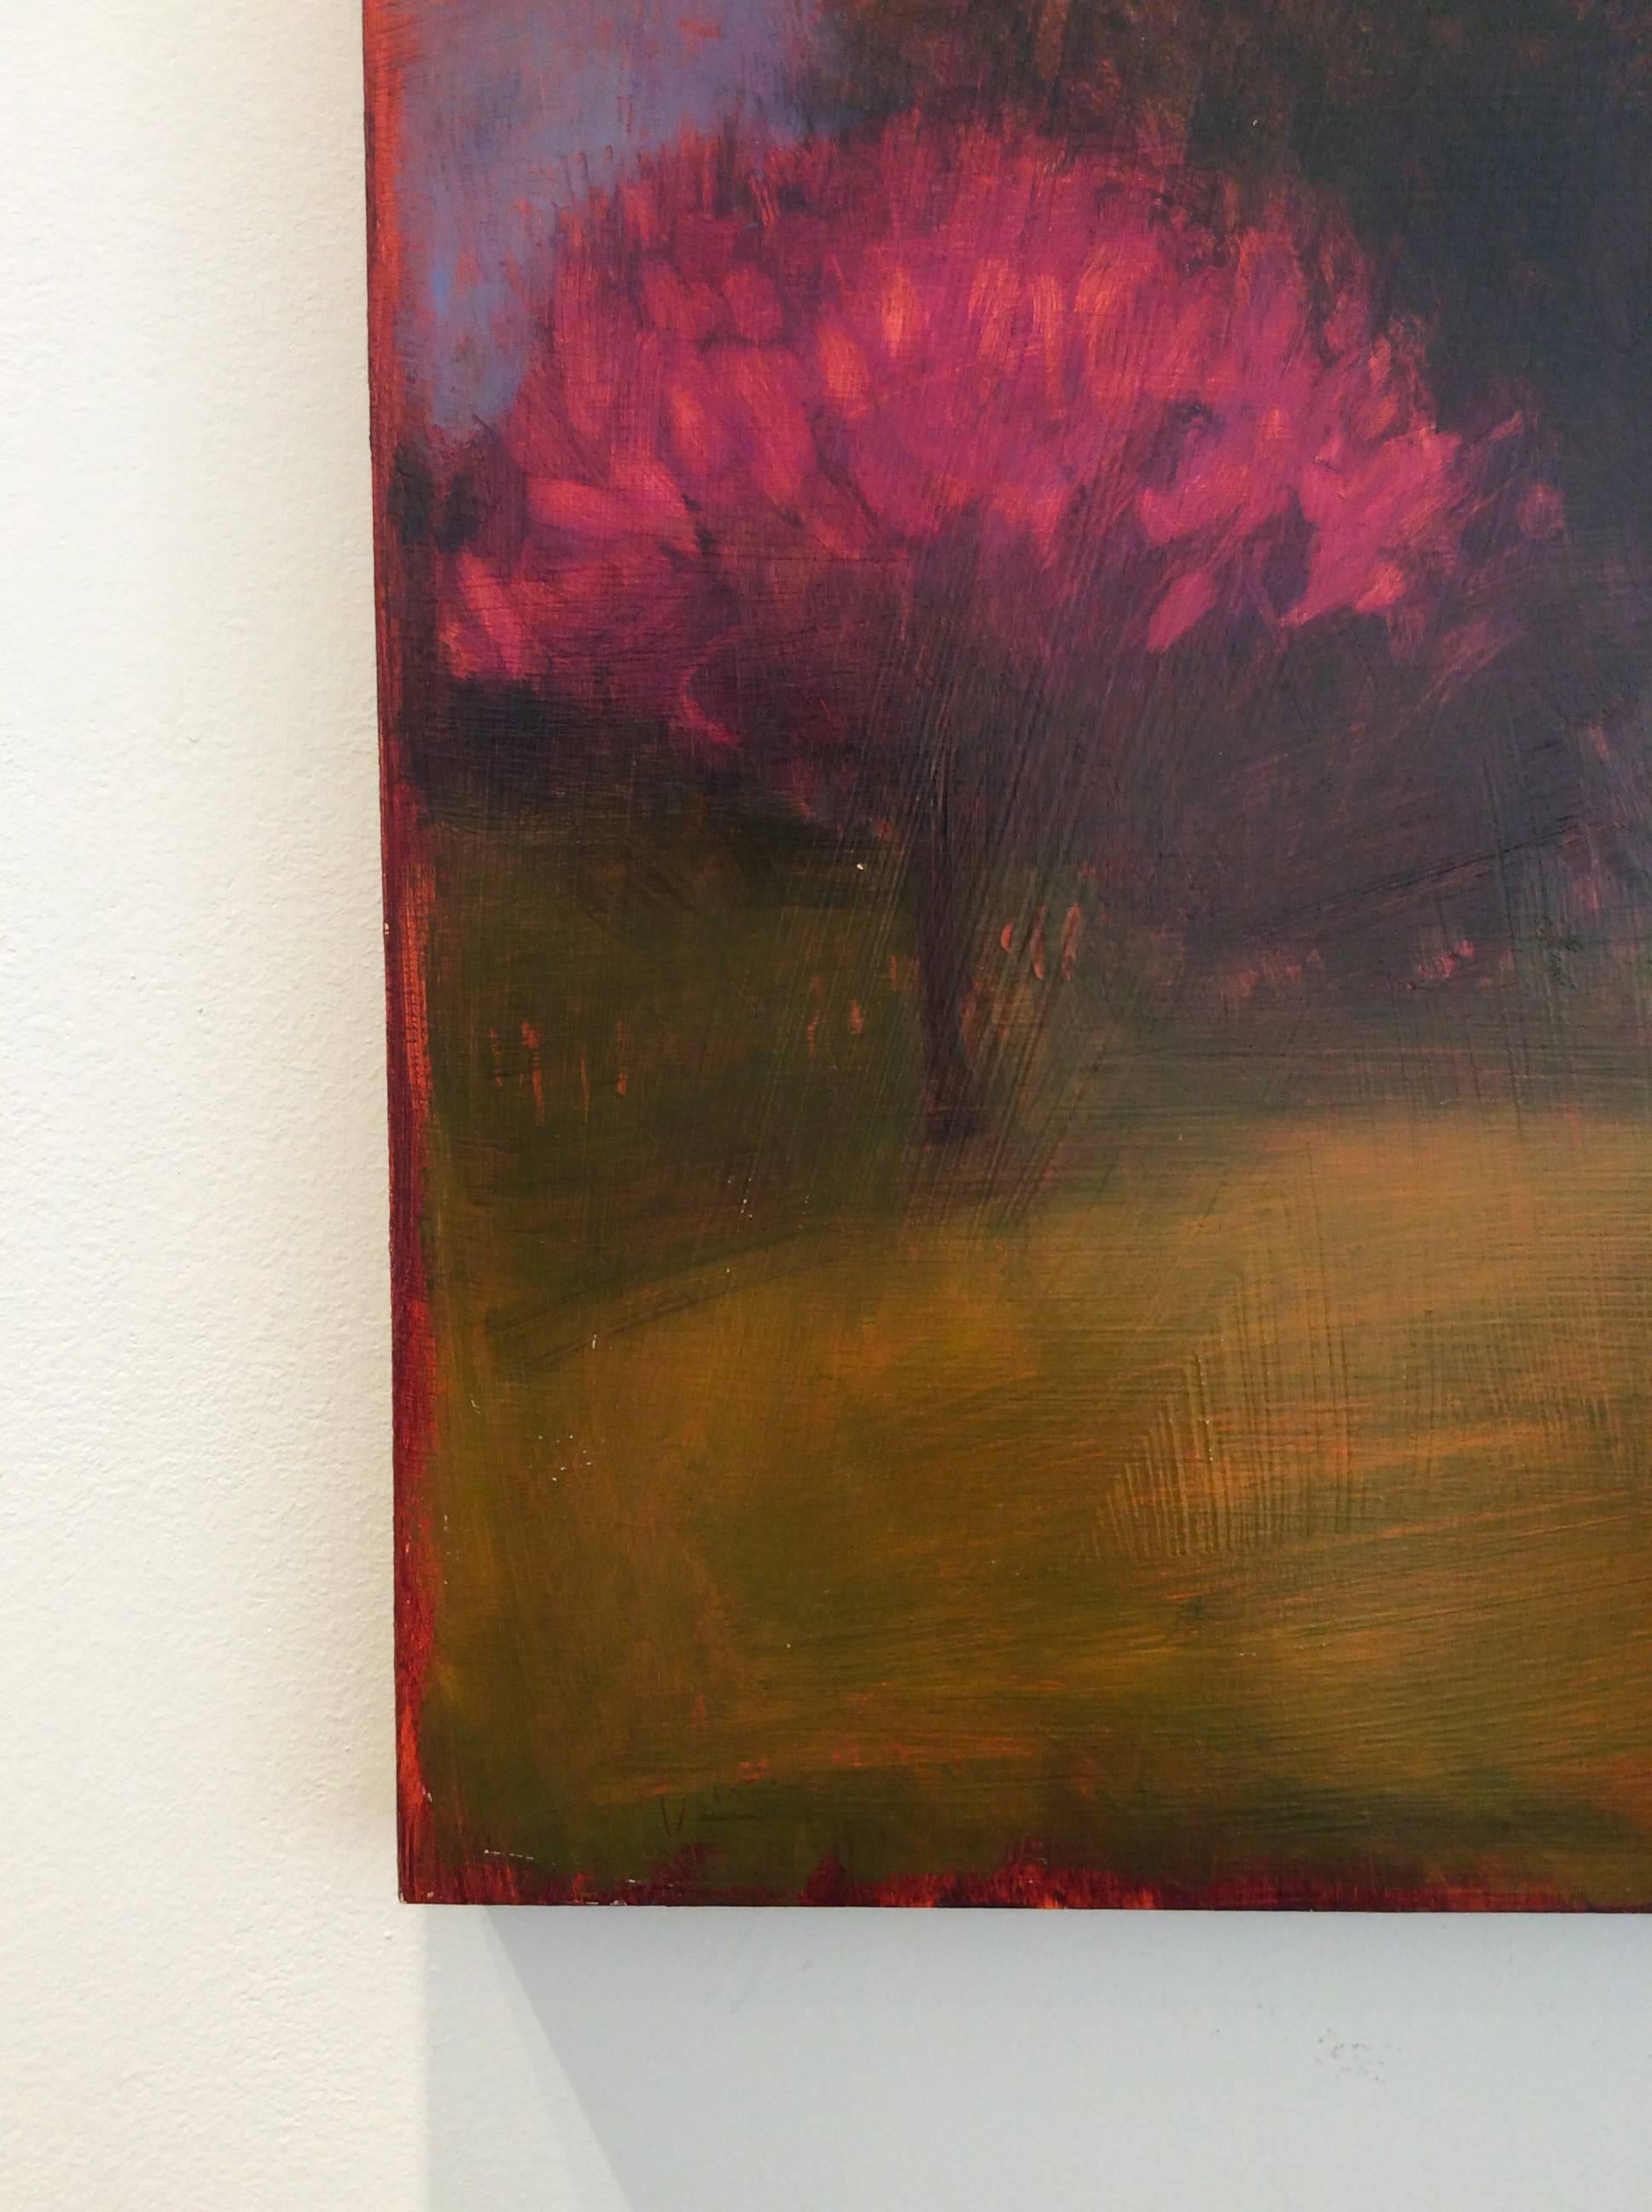 Modern, abstracted landscape painting in magenta, pink and dark green. 
oil on panel, 18 x 24 inches
No frame required, sides of the wood are painted a soft black
This painting is offered by Carrie Haddad Gallery, located in Hudson, NY.

Helgeson